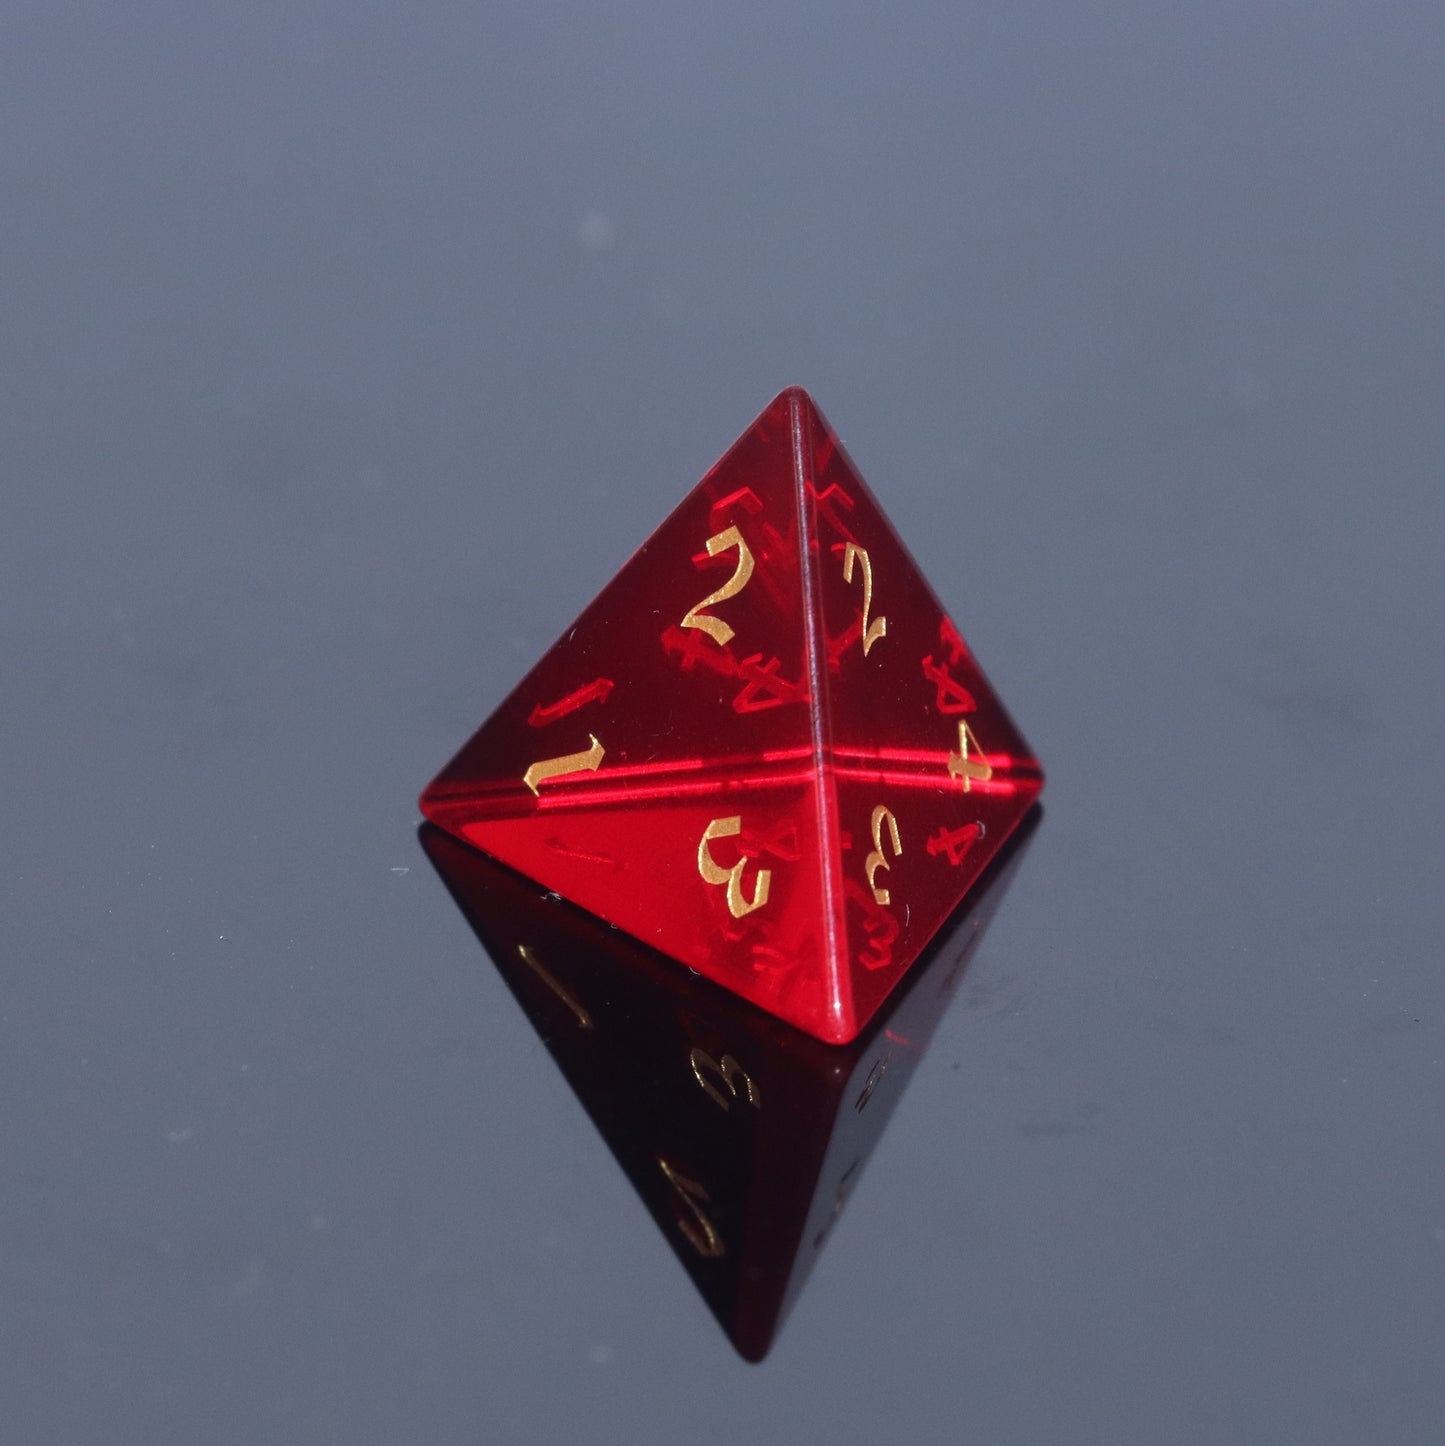 MAGISEVEN Garnet Red Glass D&D Dice Set with cardboard box for Dungeons and Dragons, Role Playing Games, MTG, ASMR